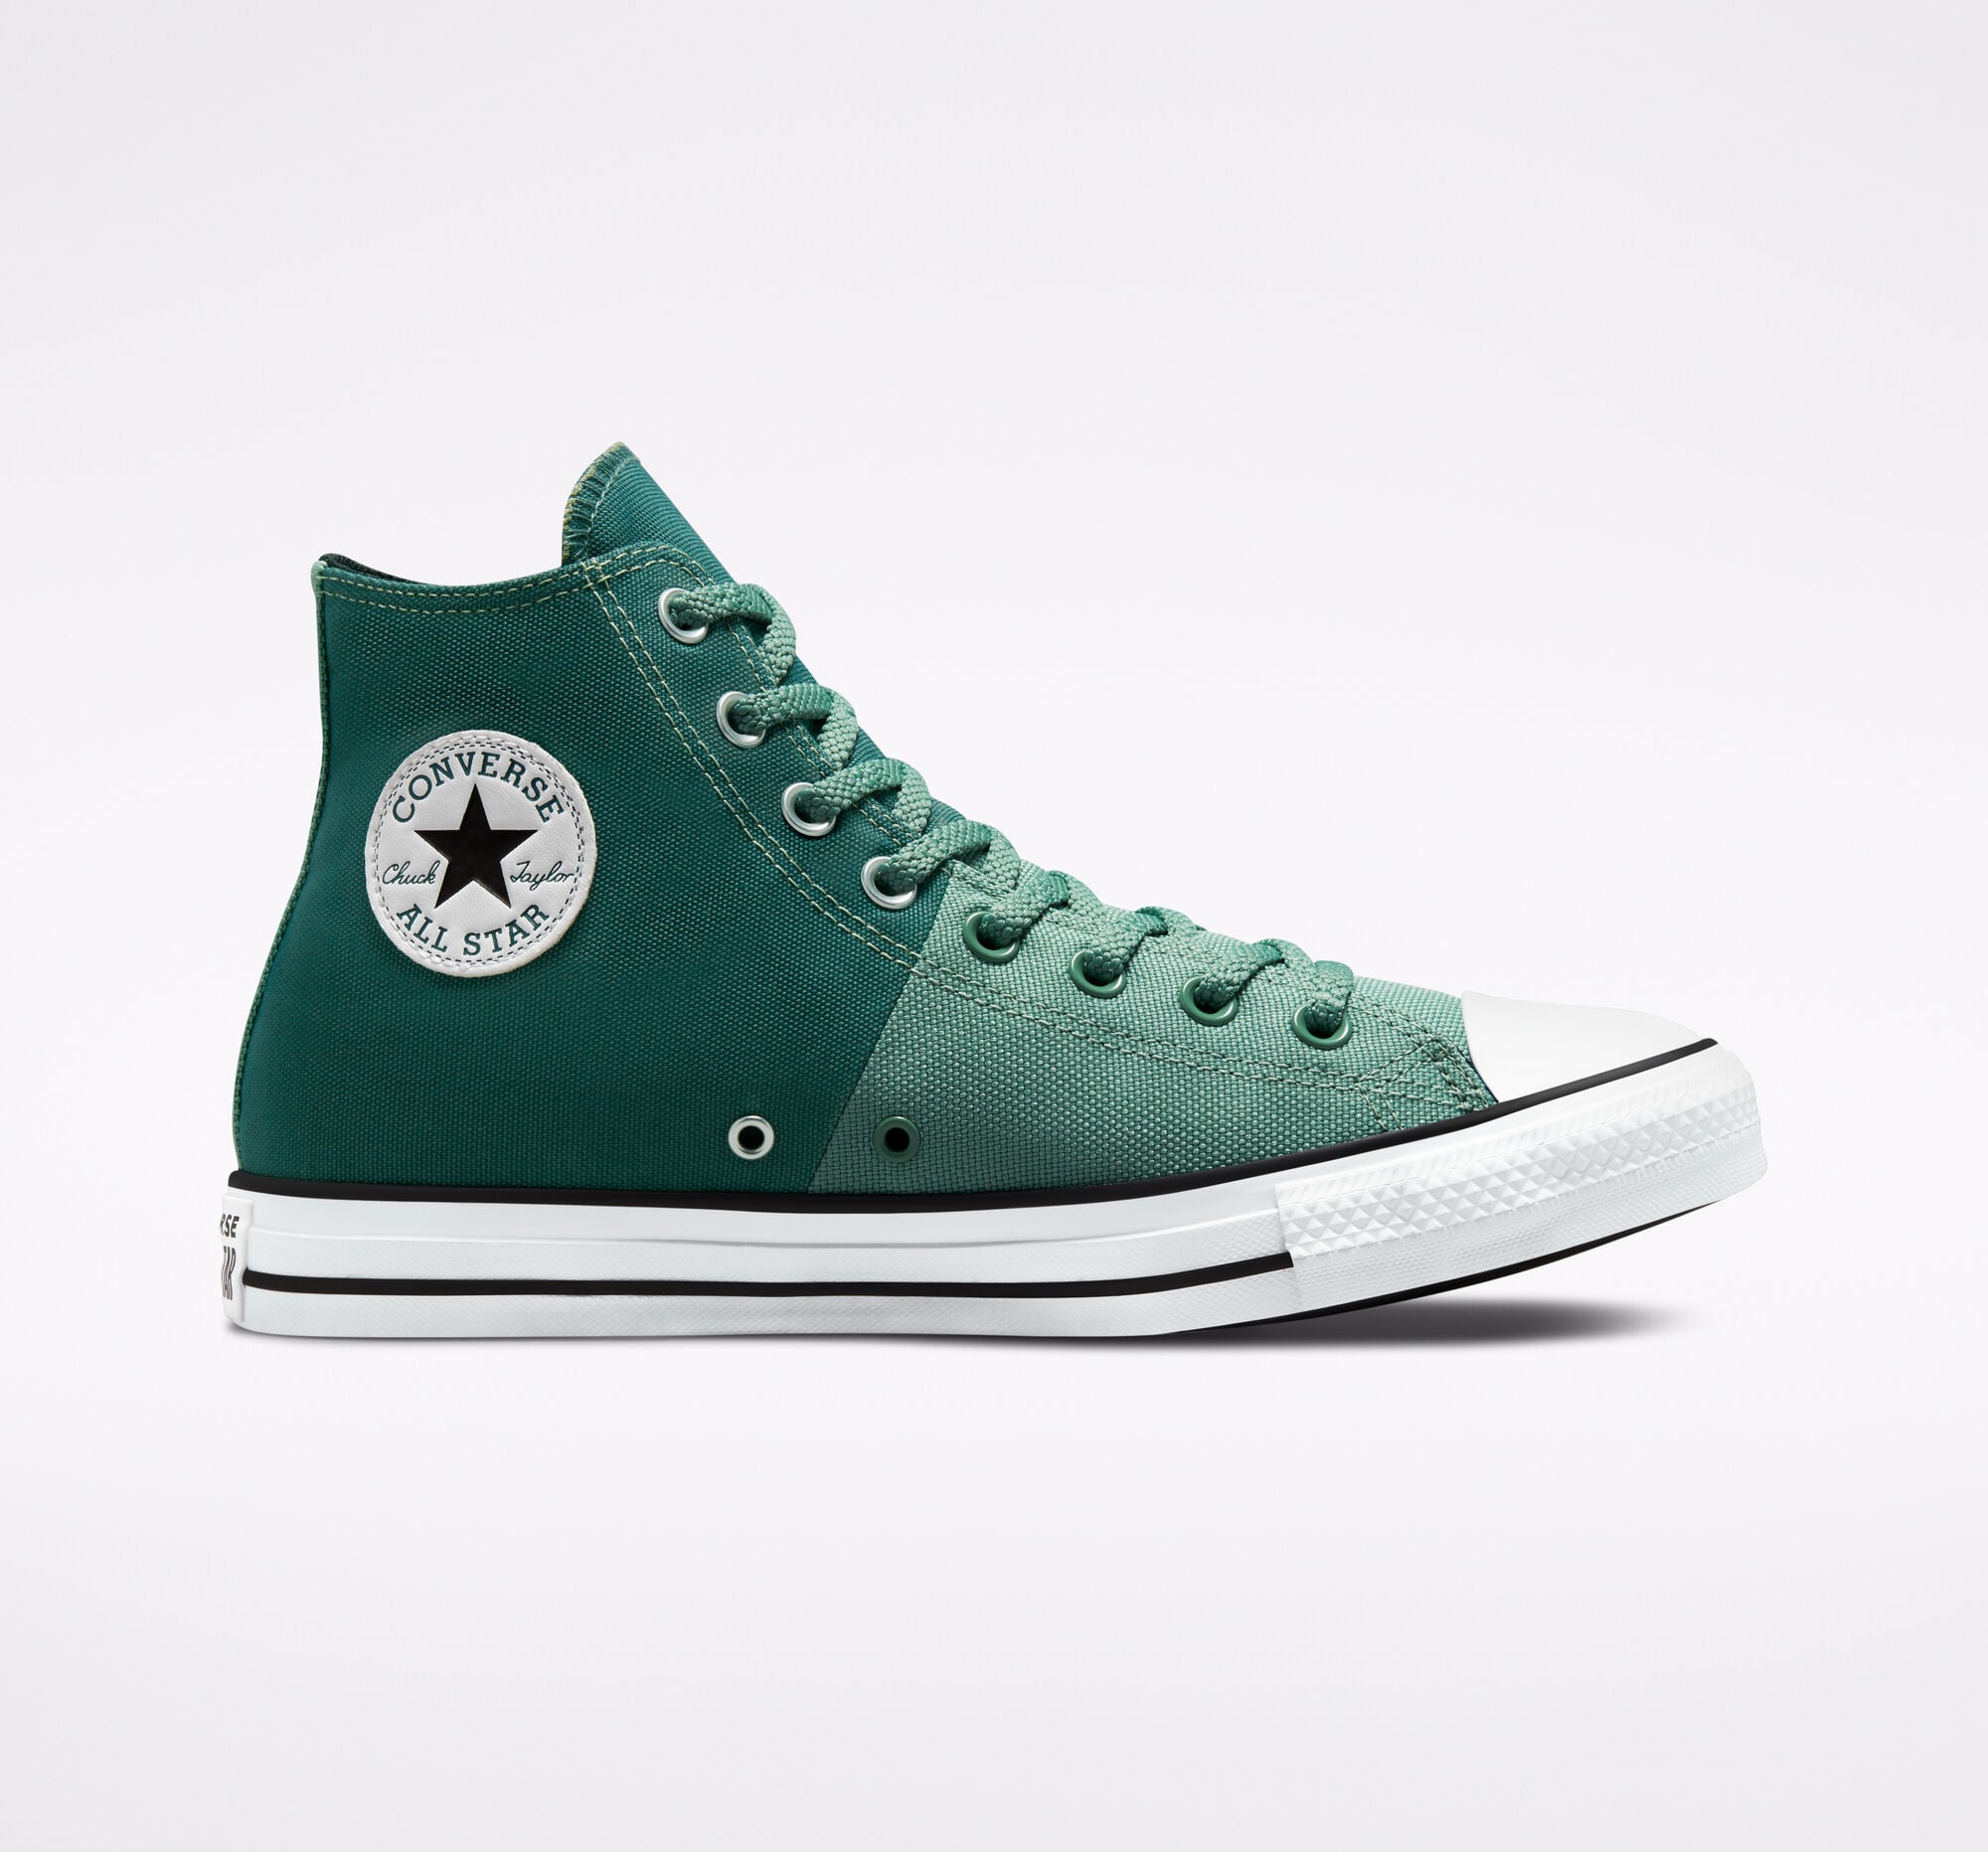 Converse Court Reimagined Chuck Taylor All Star Unisex High Shoe | The 5 Biggest Trends to Shop This Fall and Winter | POPSUGAR Photo